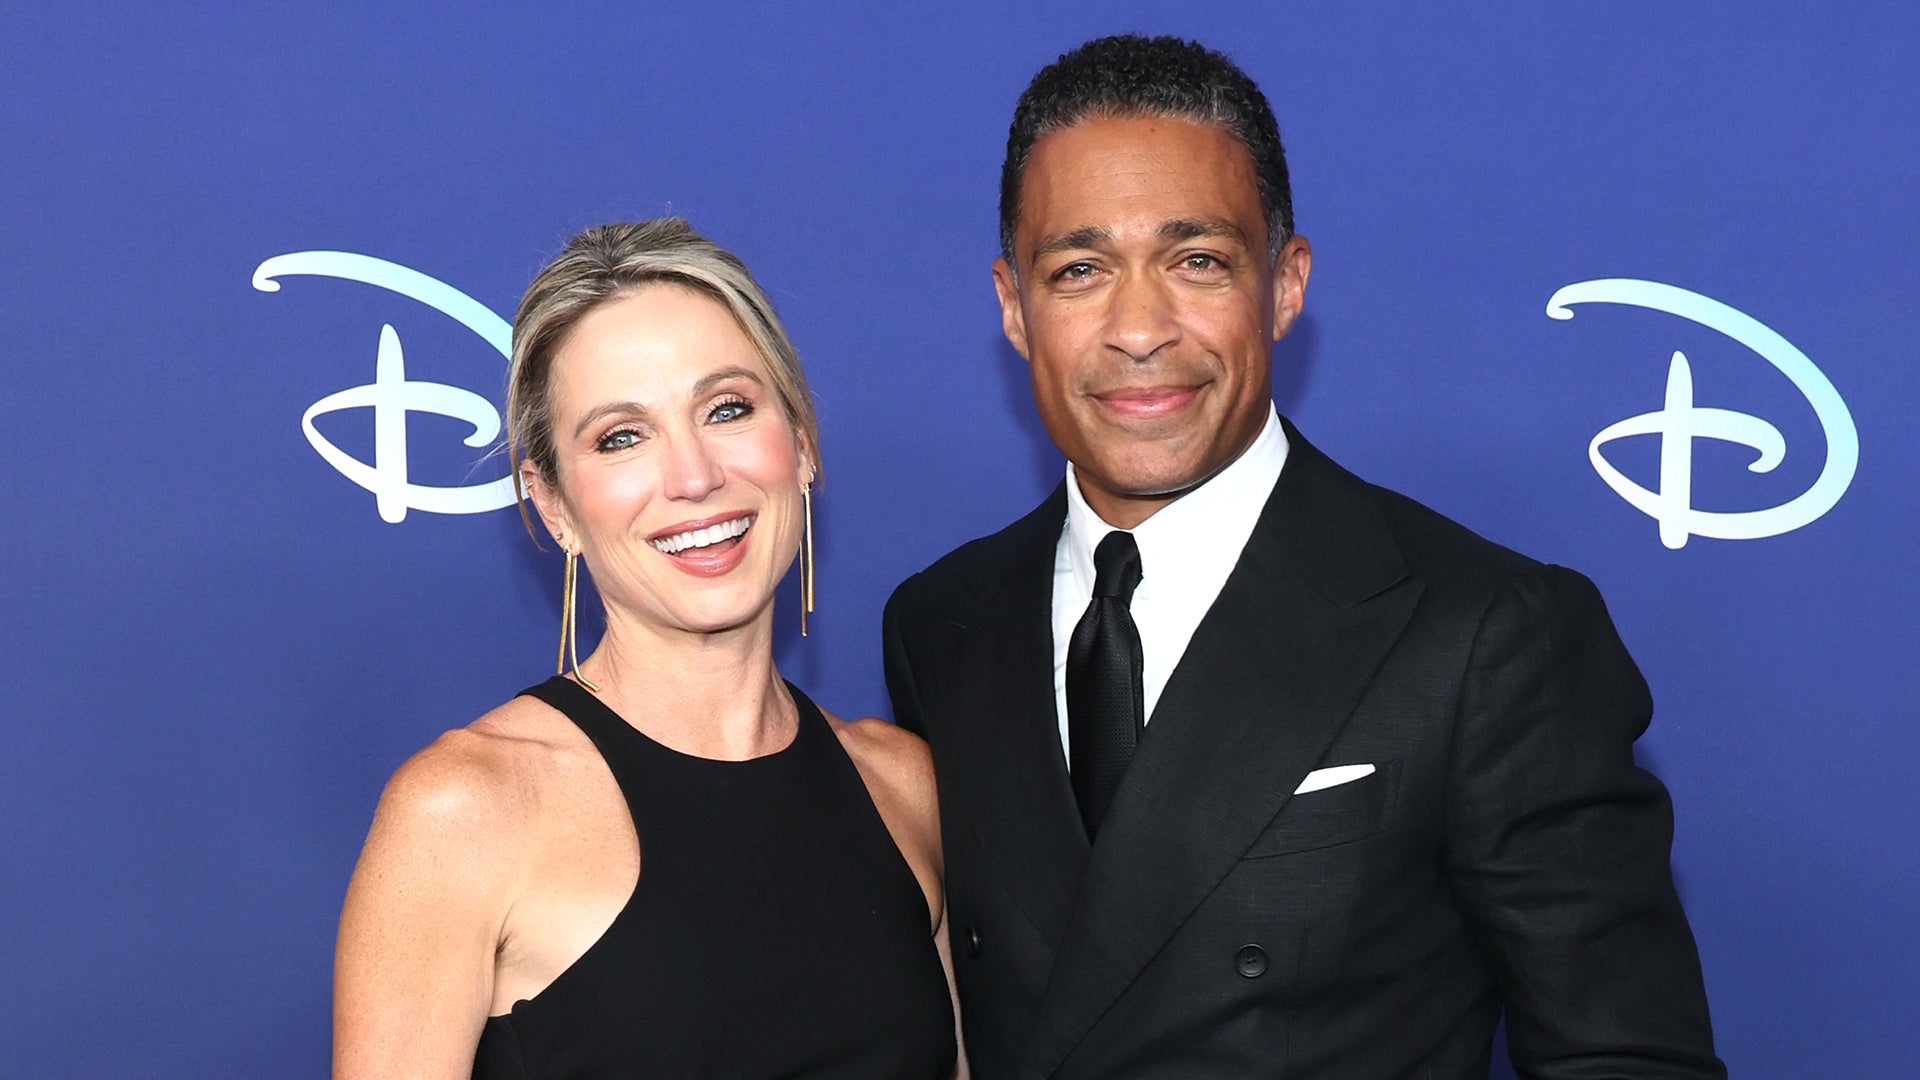 T.J. Holmes and Amy Robach: Inside the Days Leading Up to Tense Mediation Over 'GMA' Jobs